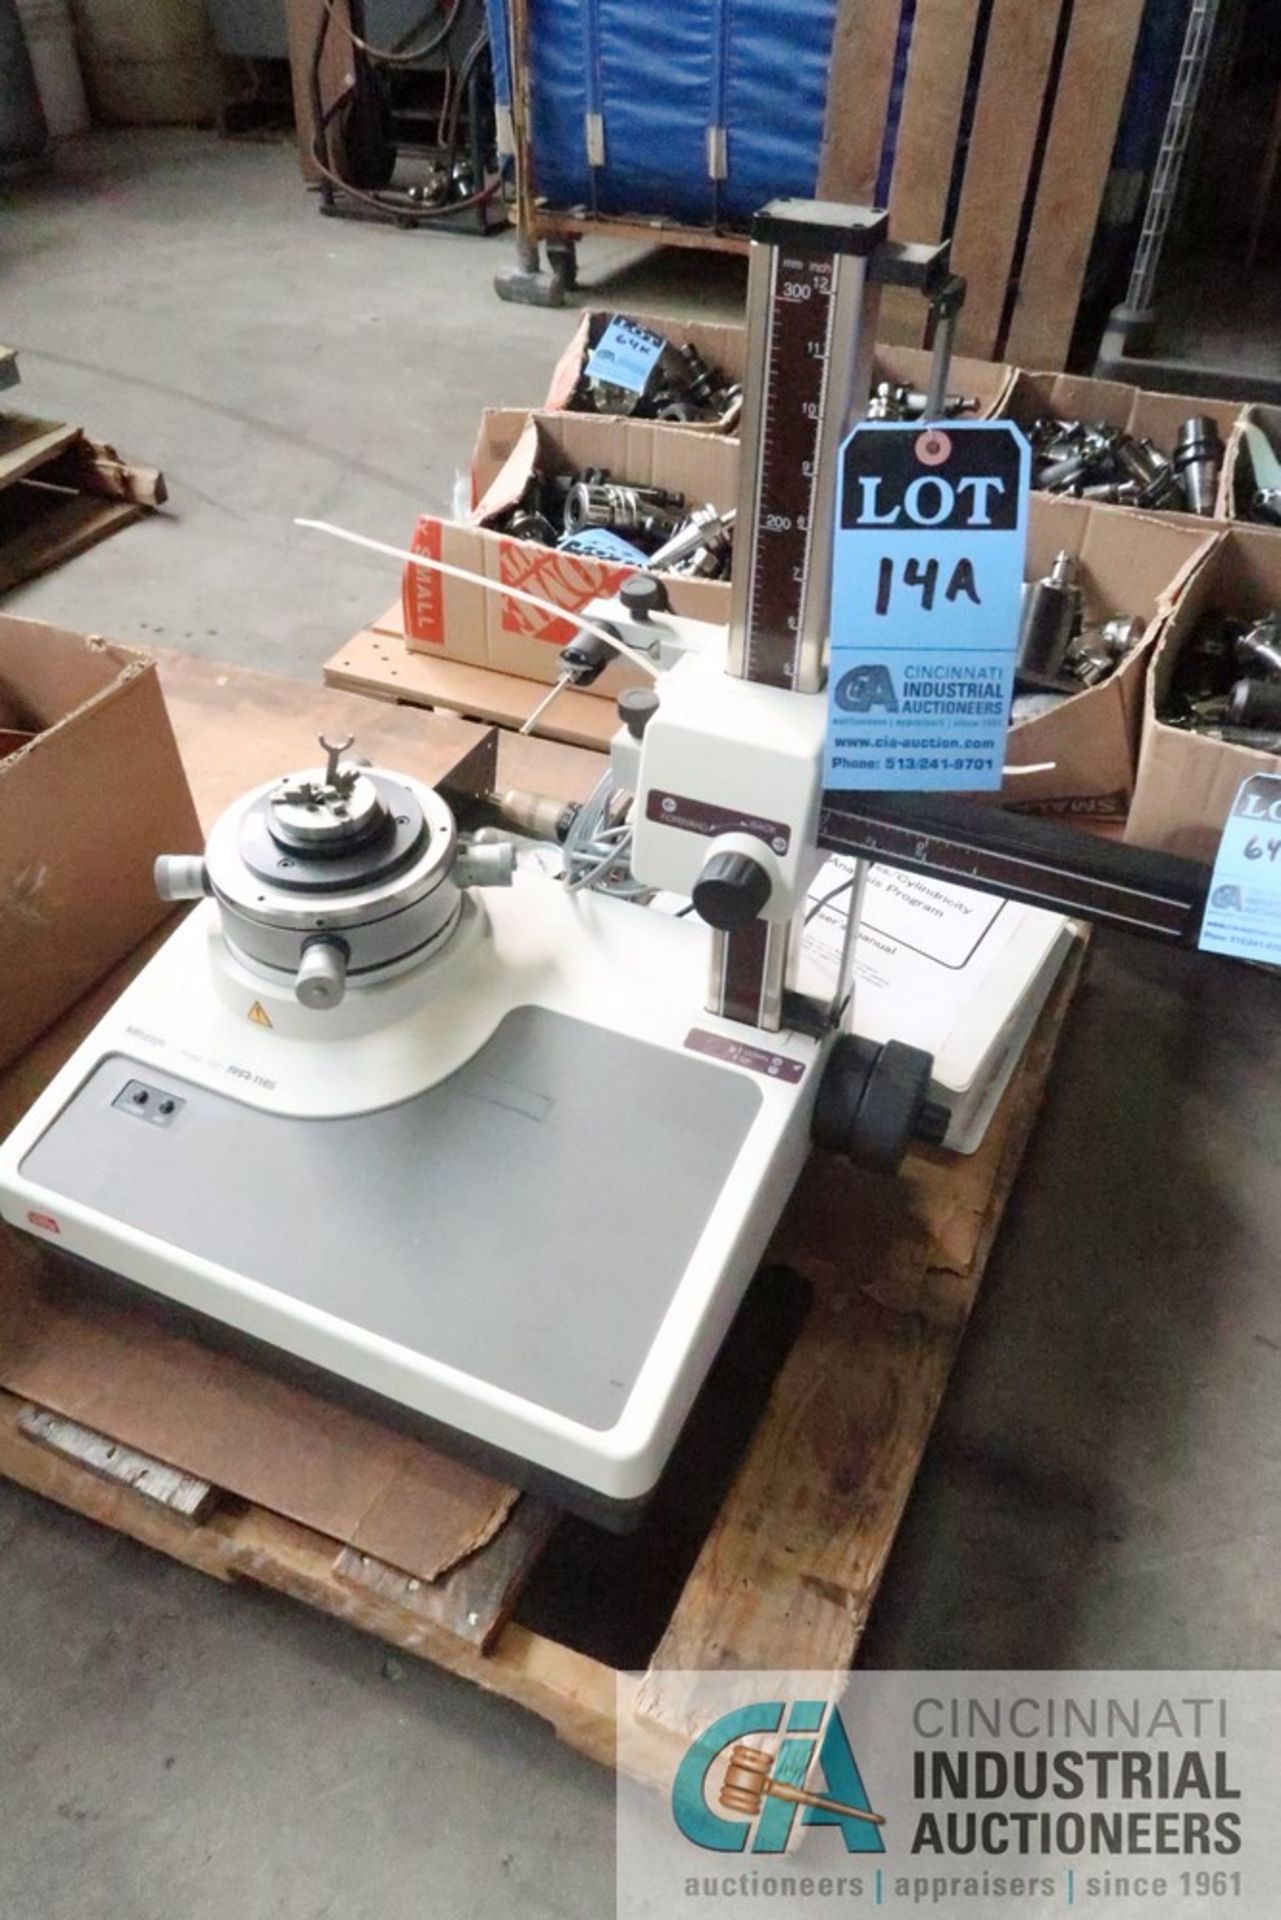 MITUTOYO MODEL RA-116 ROUNDNESS TESTER; S/N 200112 - Out of Service